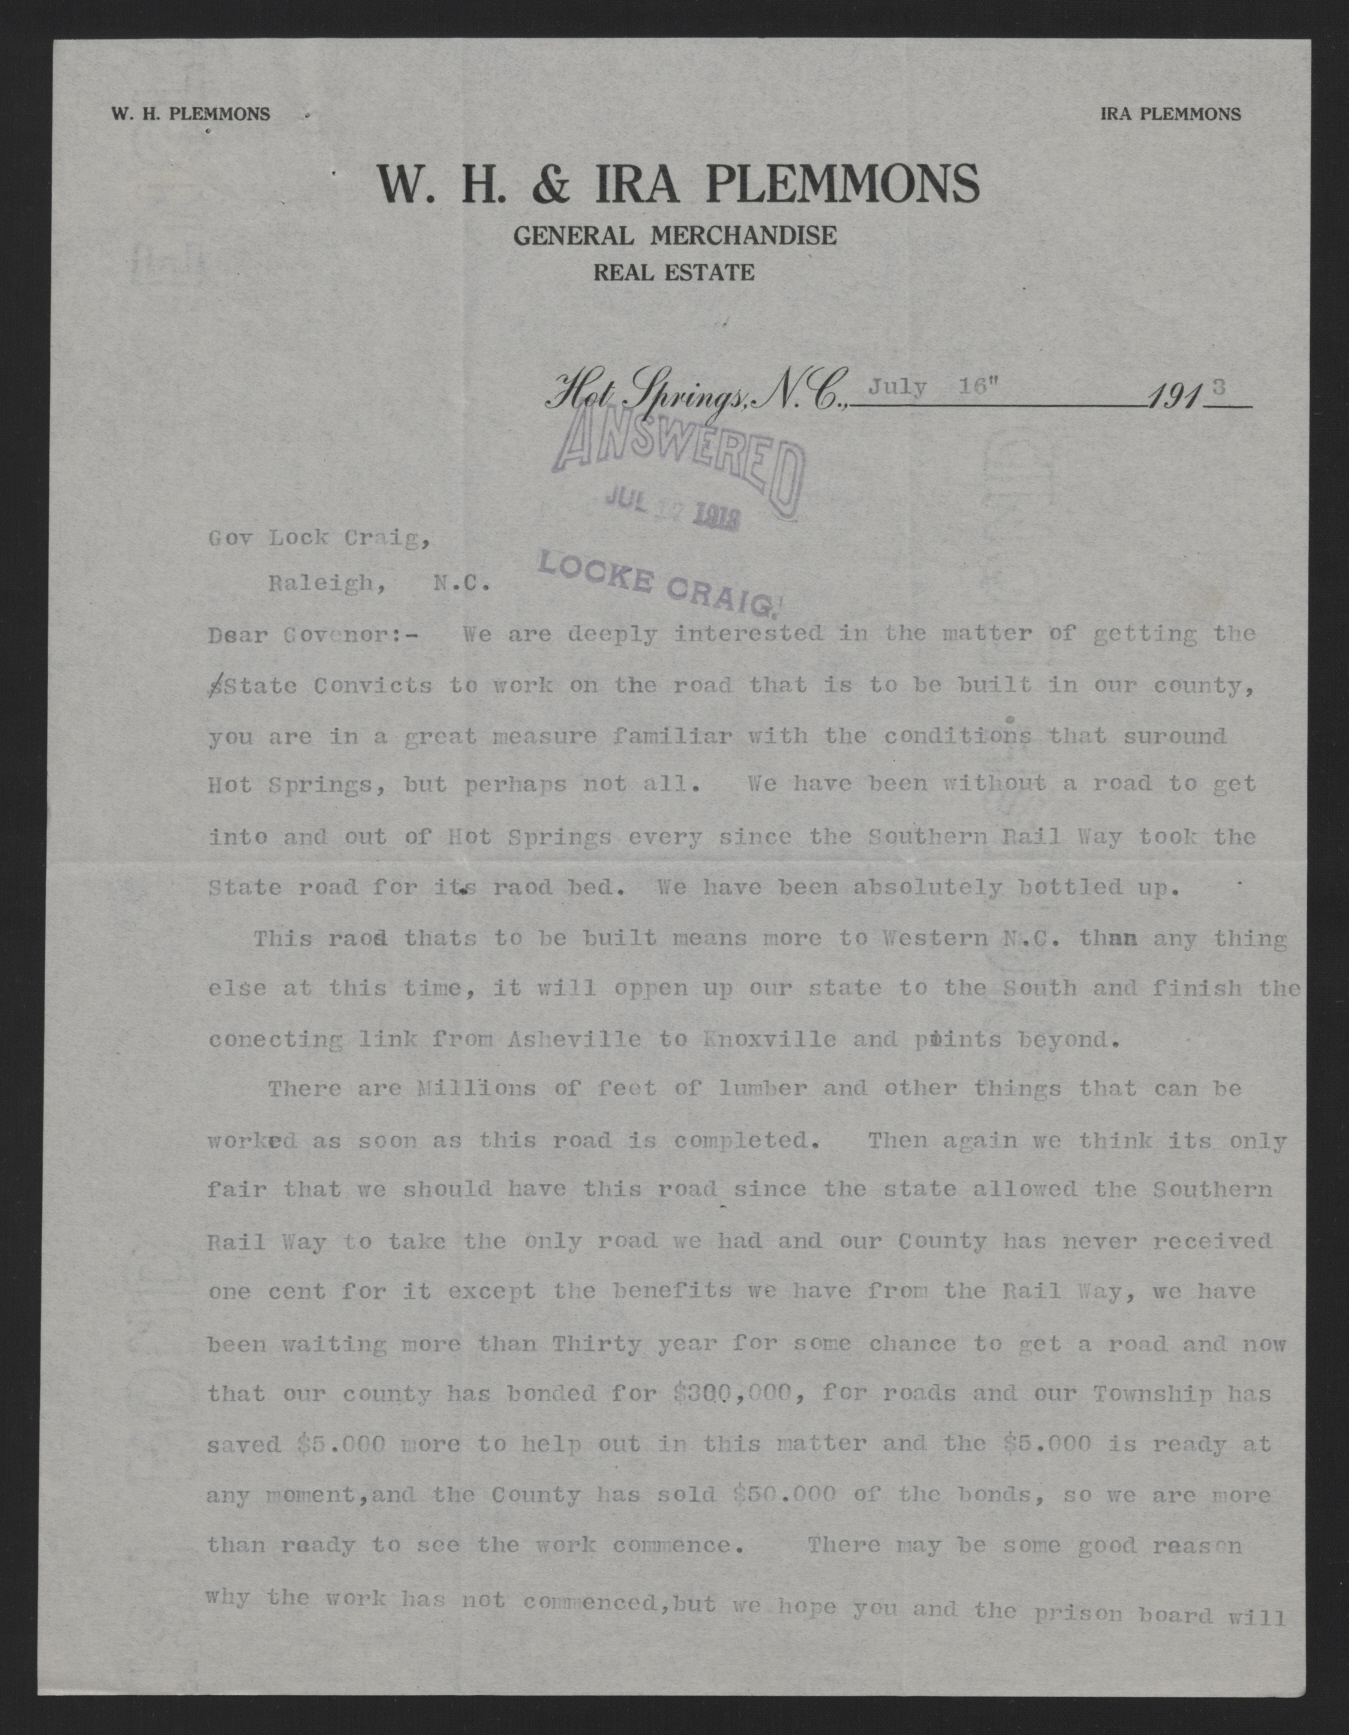 Letter from Plemmons to Craig, July 16, 1913, page 1